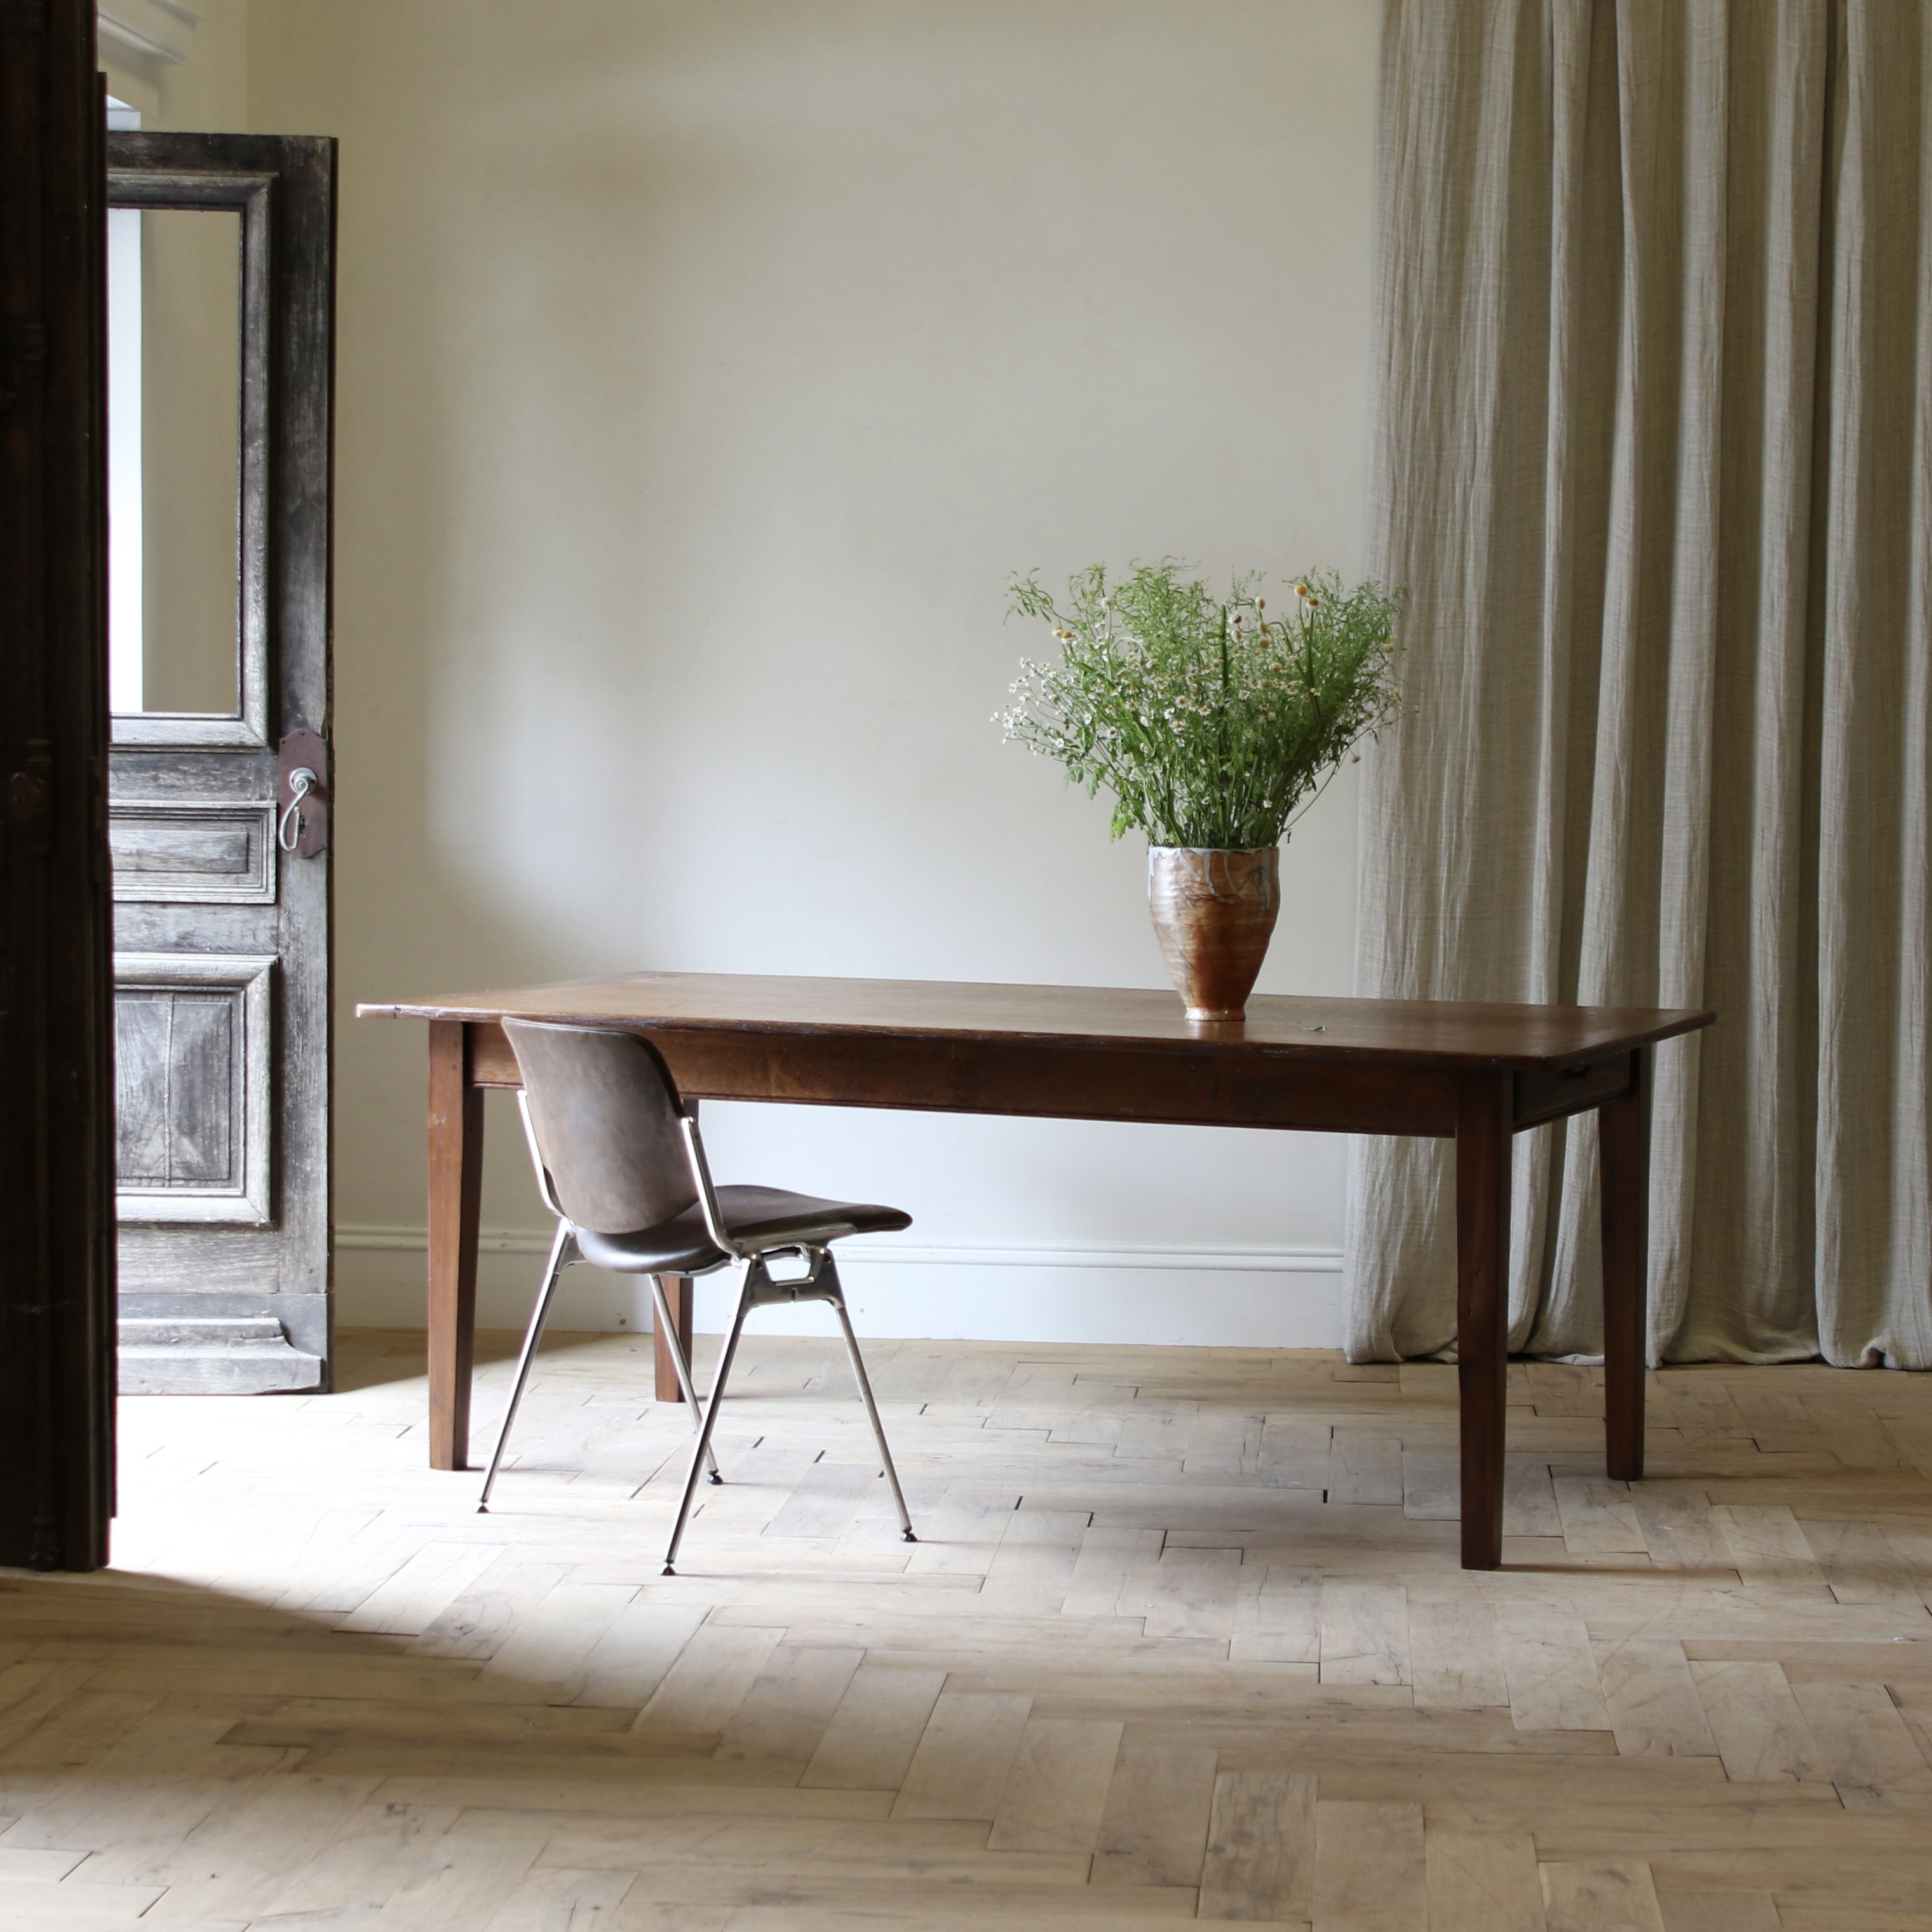 143-15 - French Provincial Dining Table // Length 2m